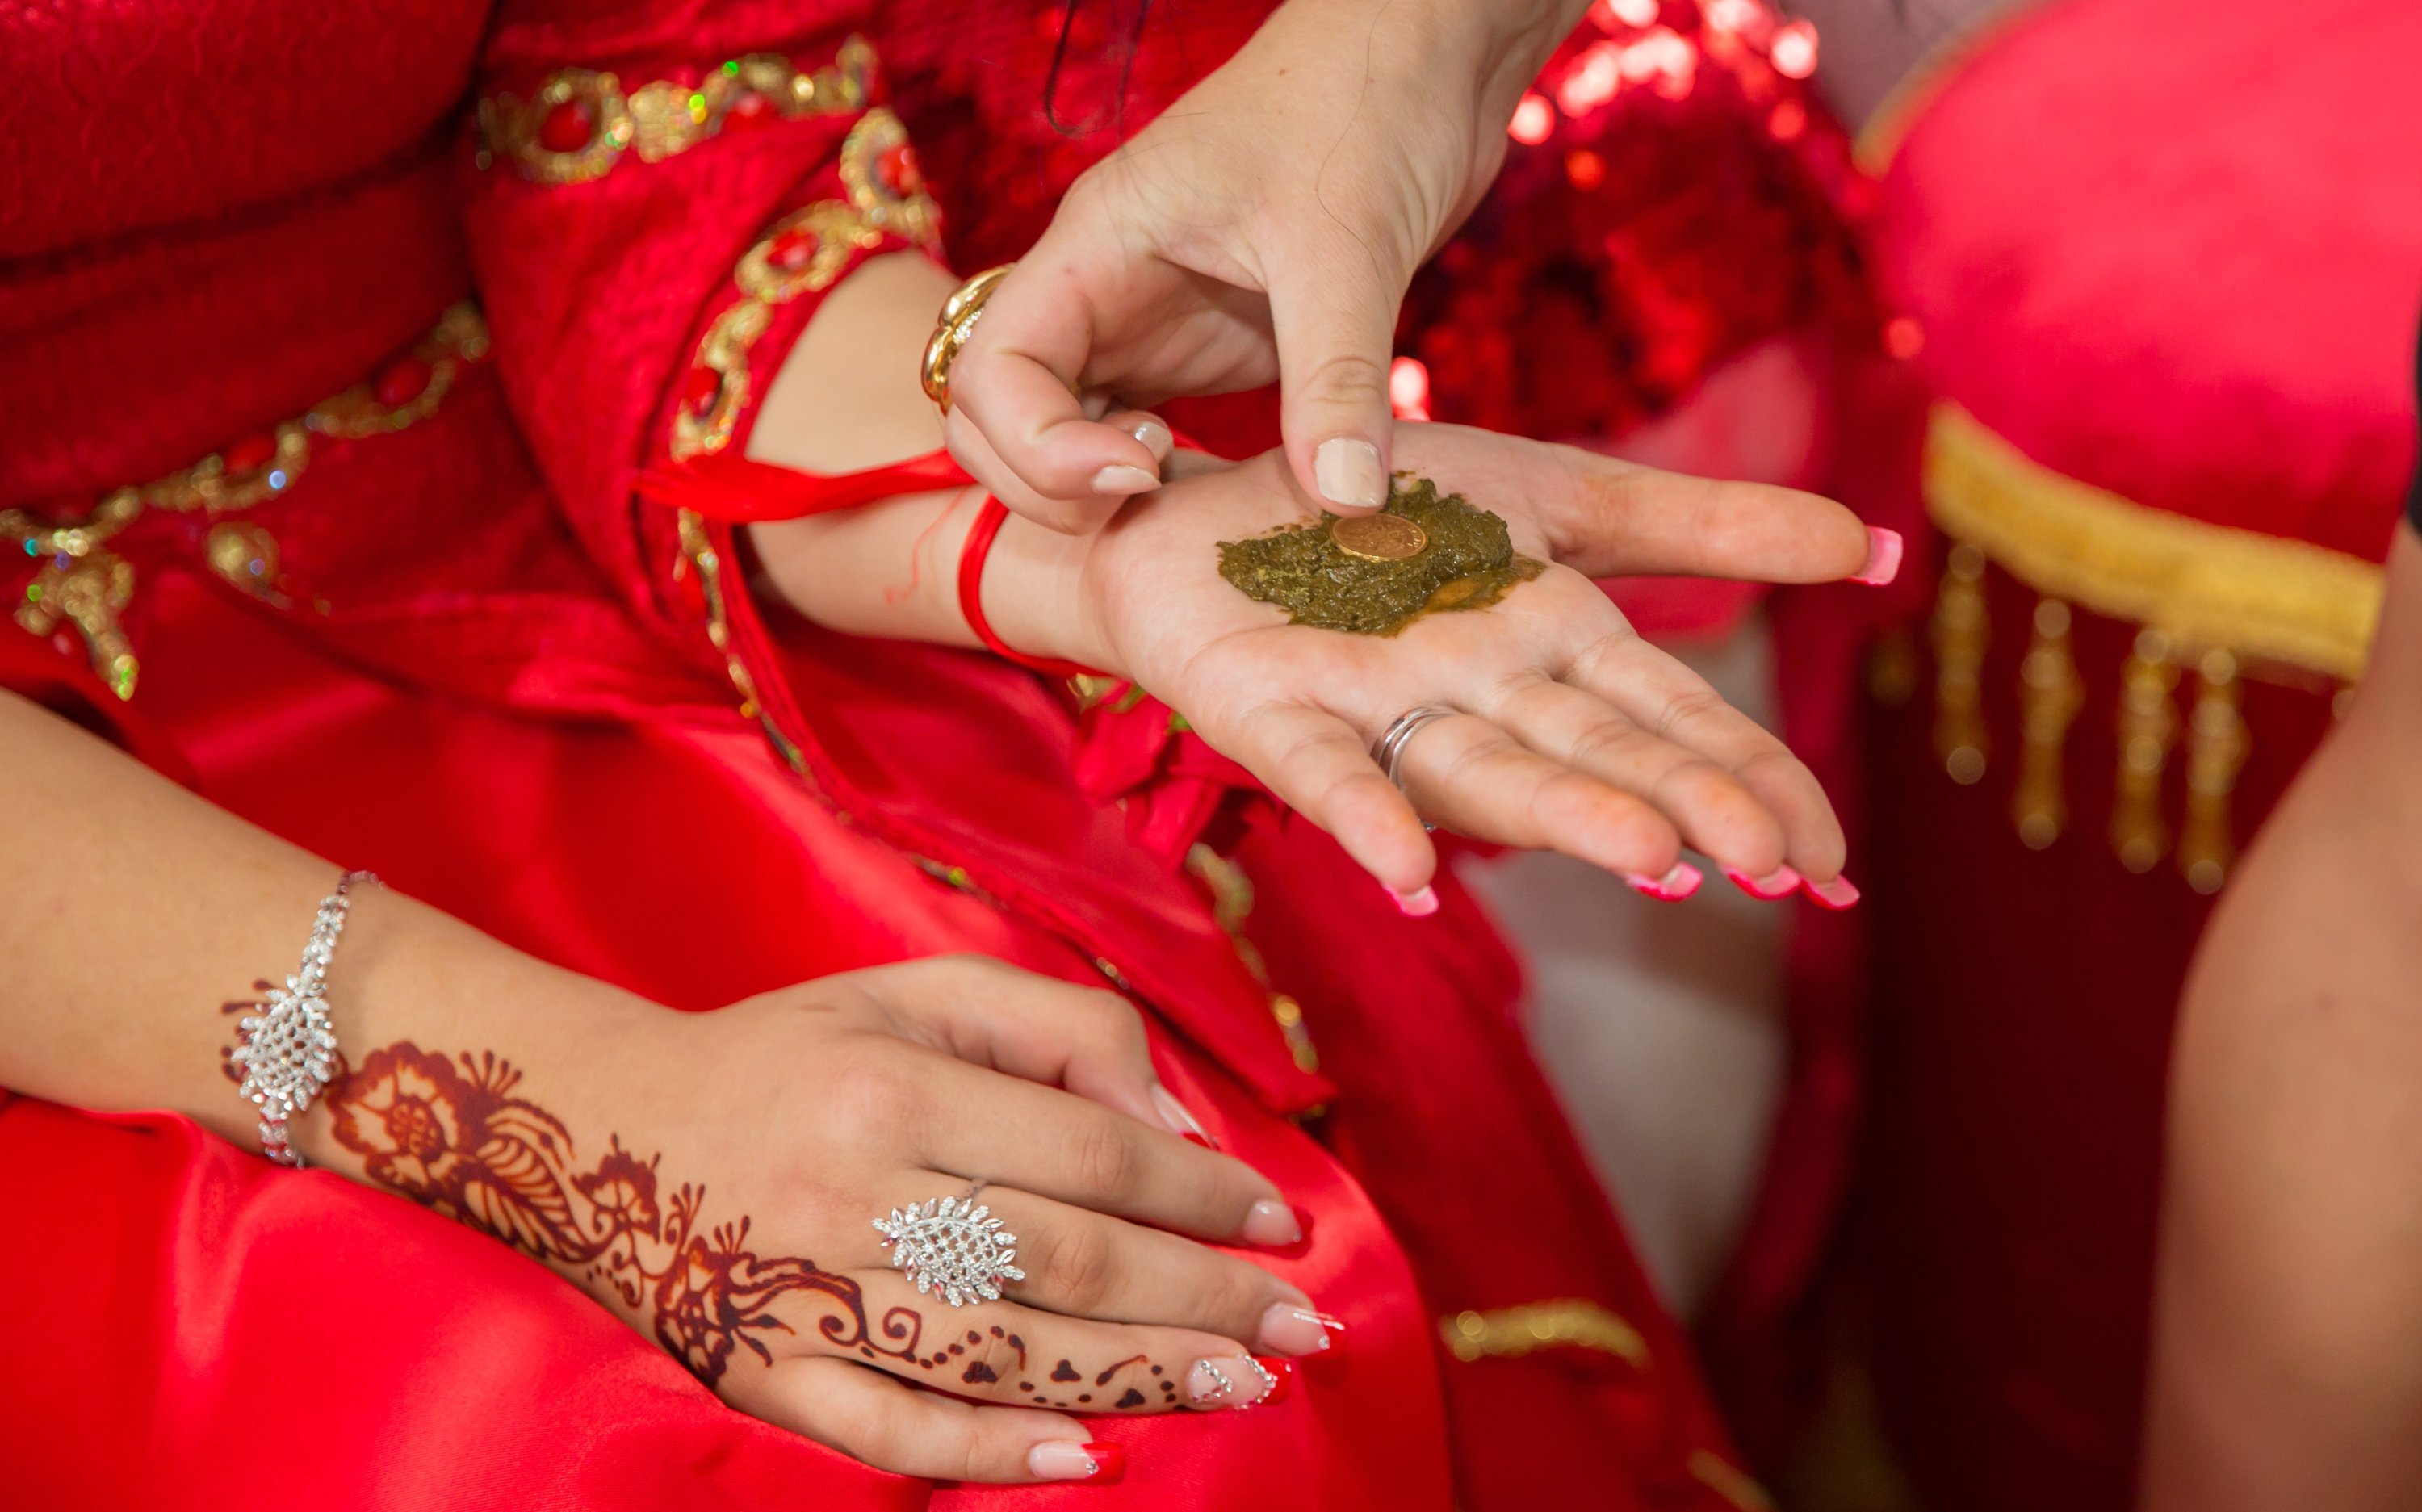 In a traditional Turkish henna night, the bride will get a dollop of henna in her palms and have a gold coin pressed into it. (Shutterstock Photo)